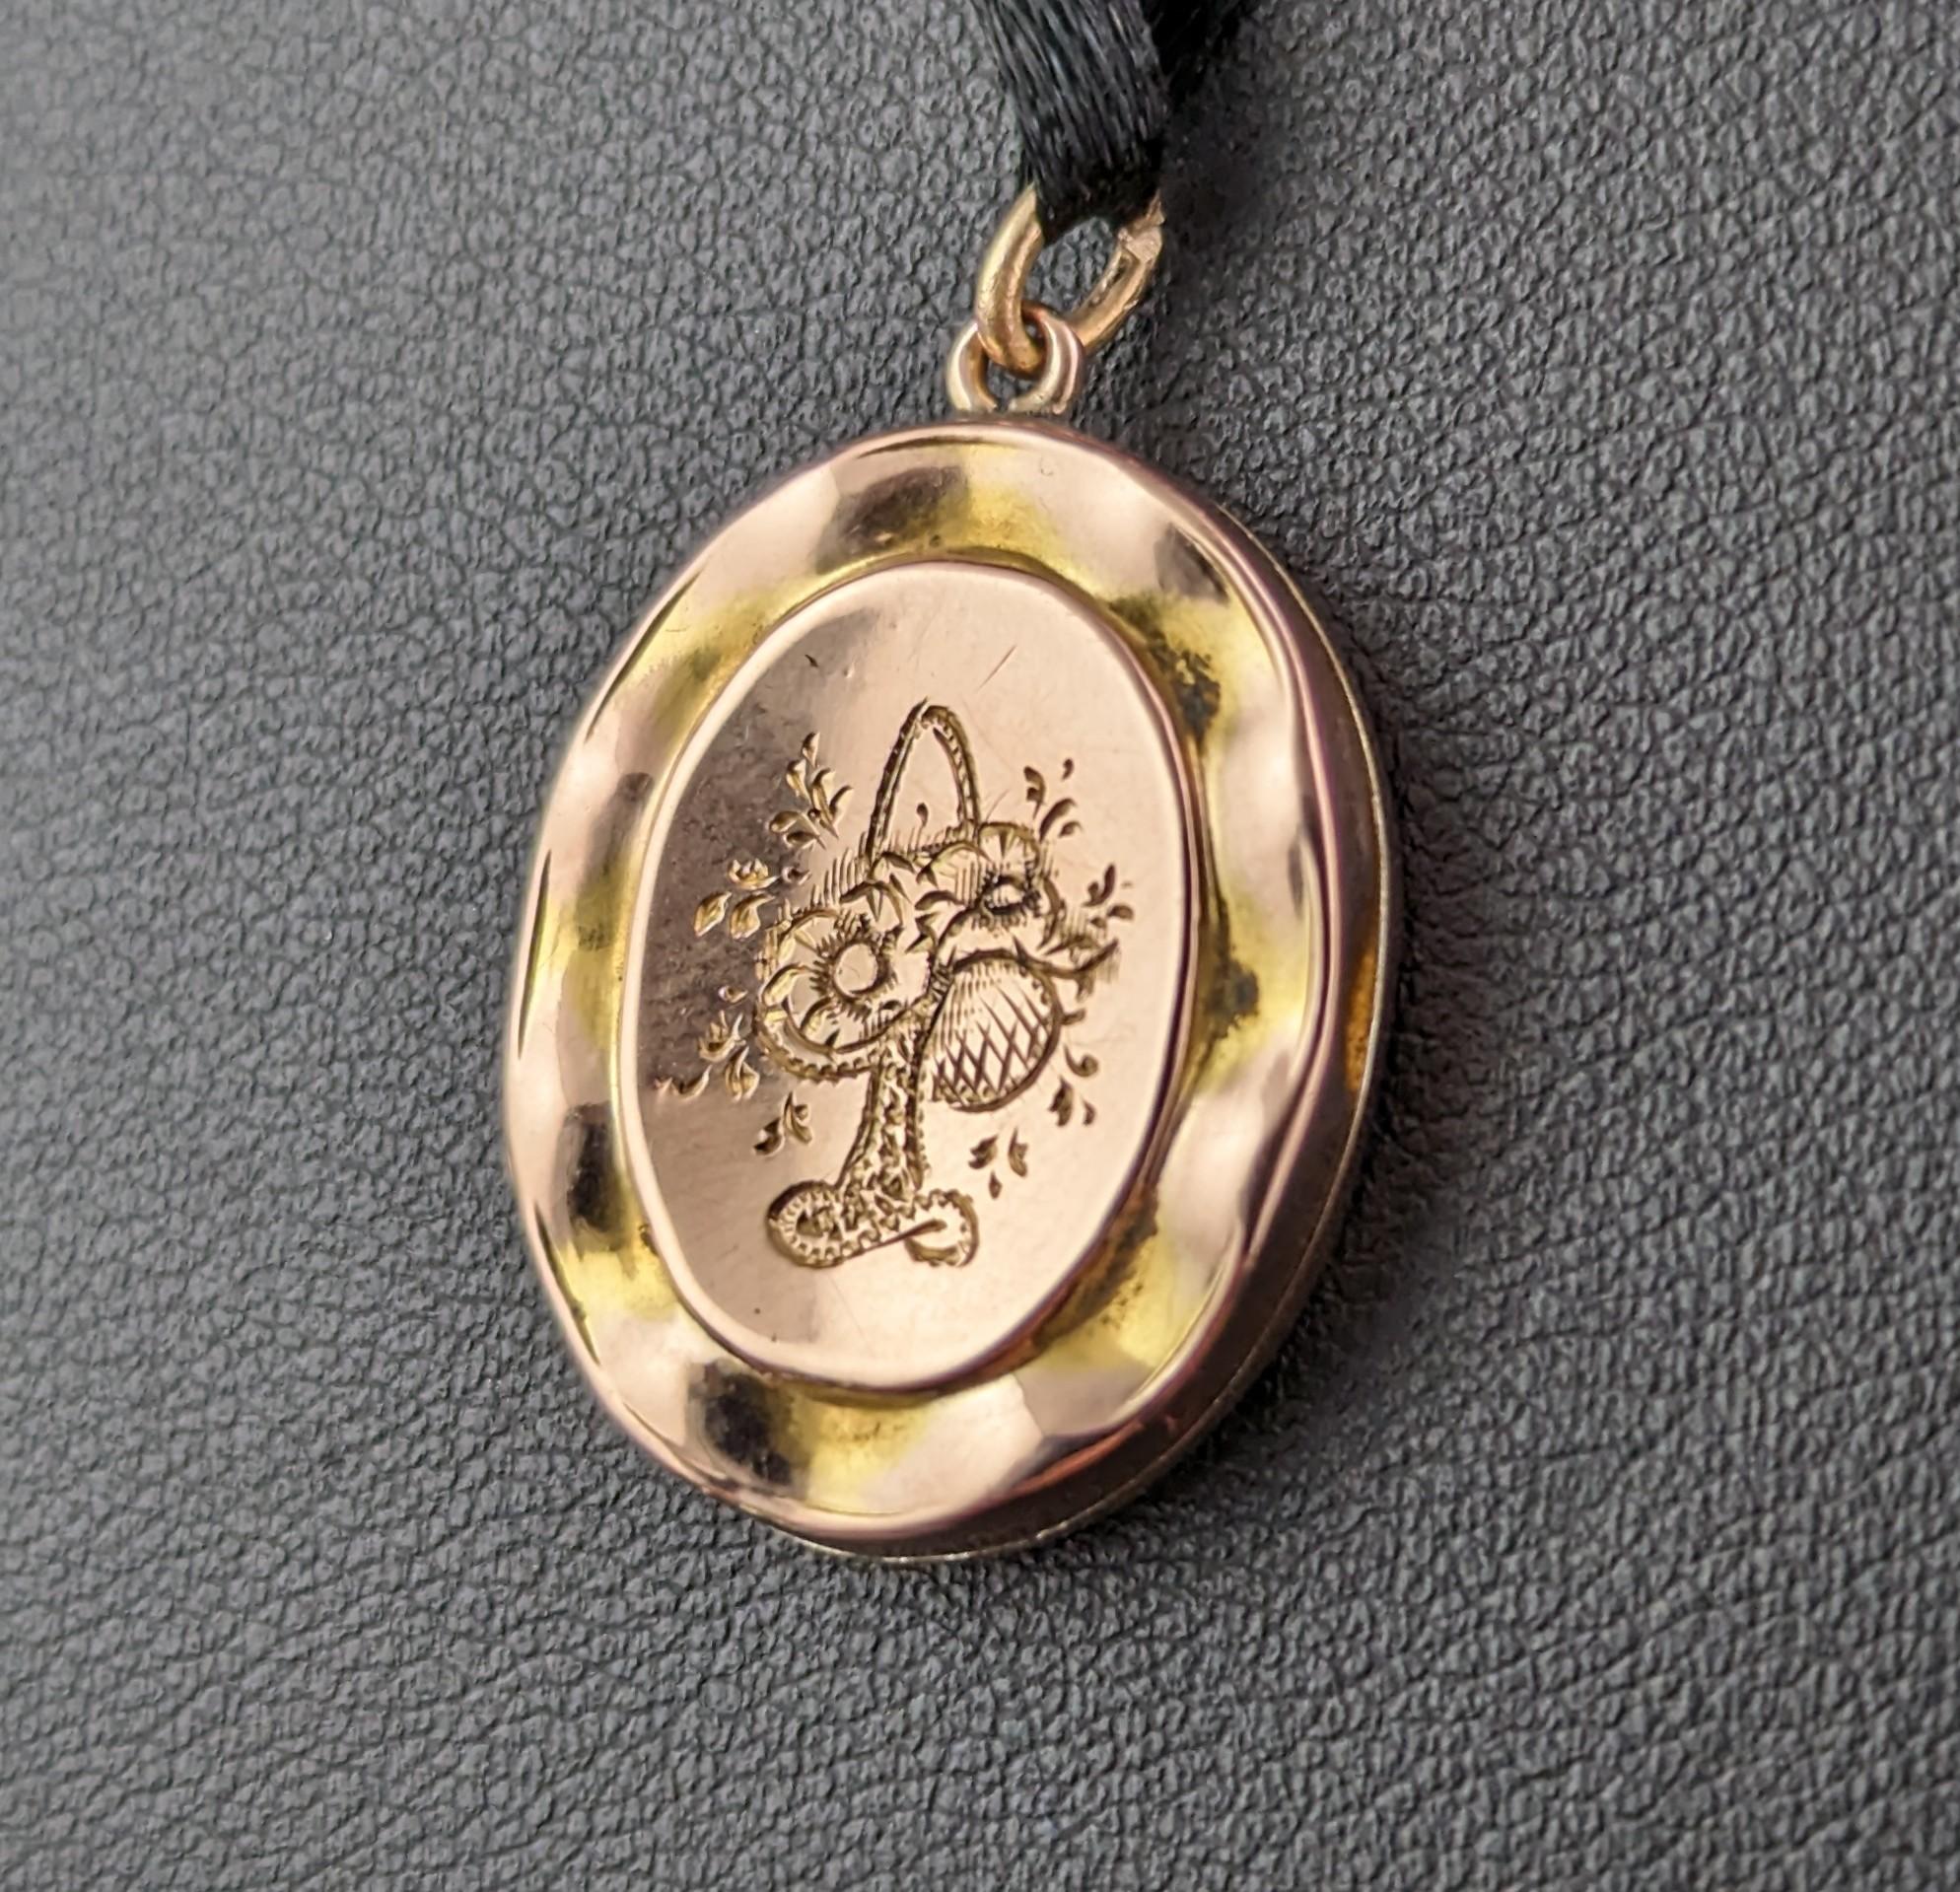 A delightful little antique 9ct gold front and back locket pendant.

Edwardian era it has elaborately engraved designs front and back, one side engraved with a lovely basket of flowers and the other with a bird and foliate.

It has the most